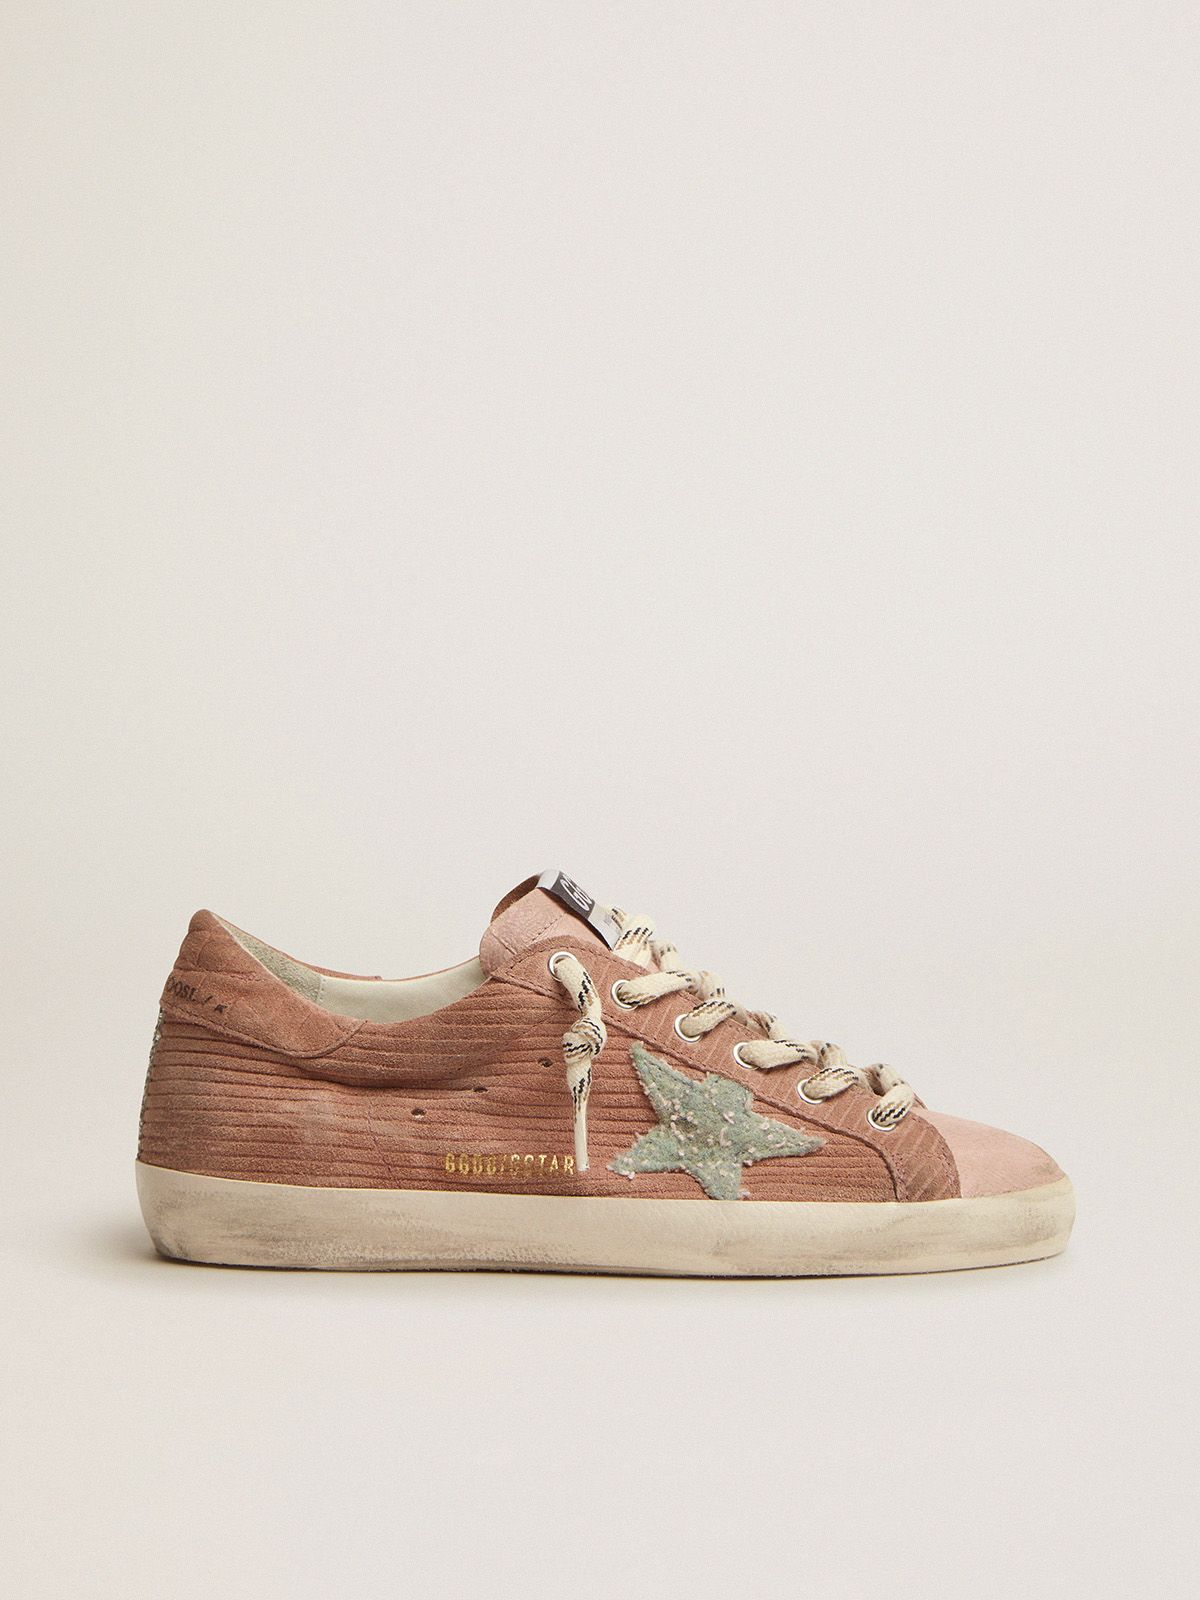 golden goose sneakers and corduroy print with suede Super-Star bouclé peach-pink in star